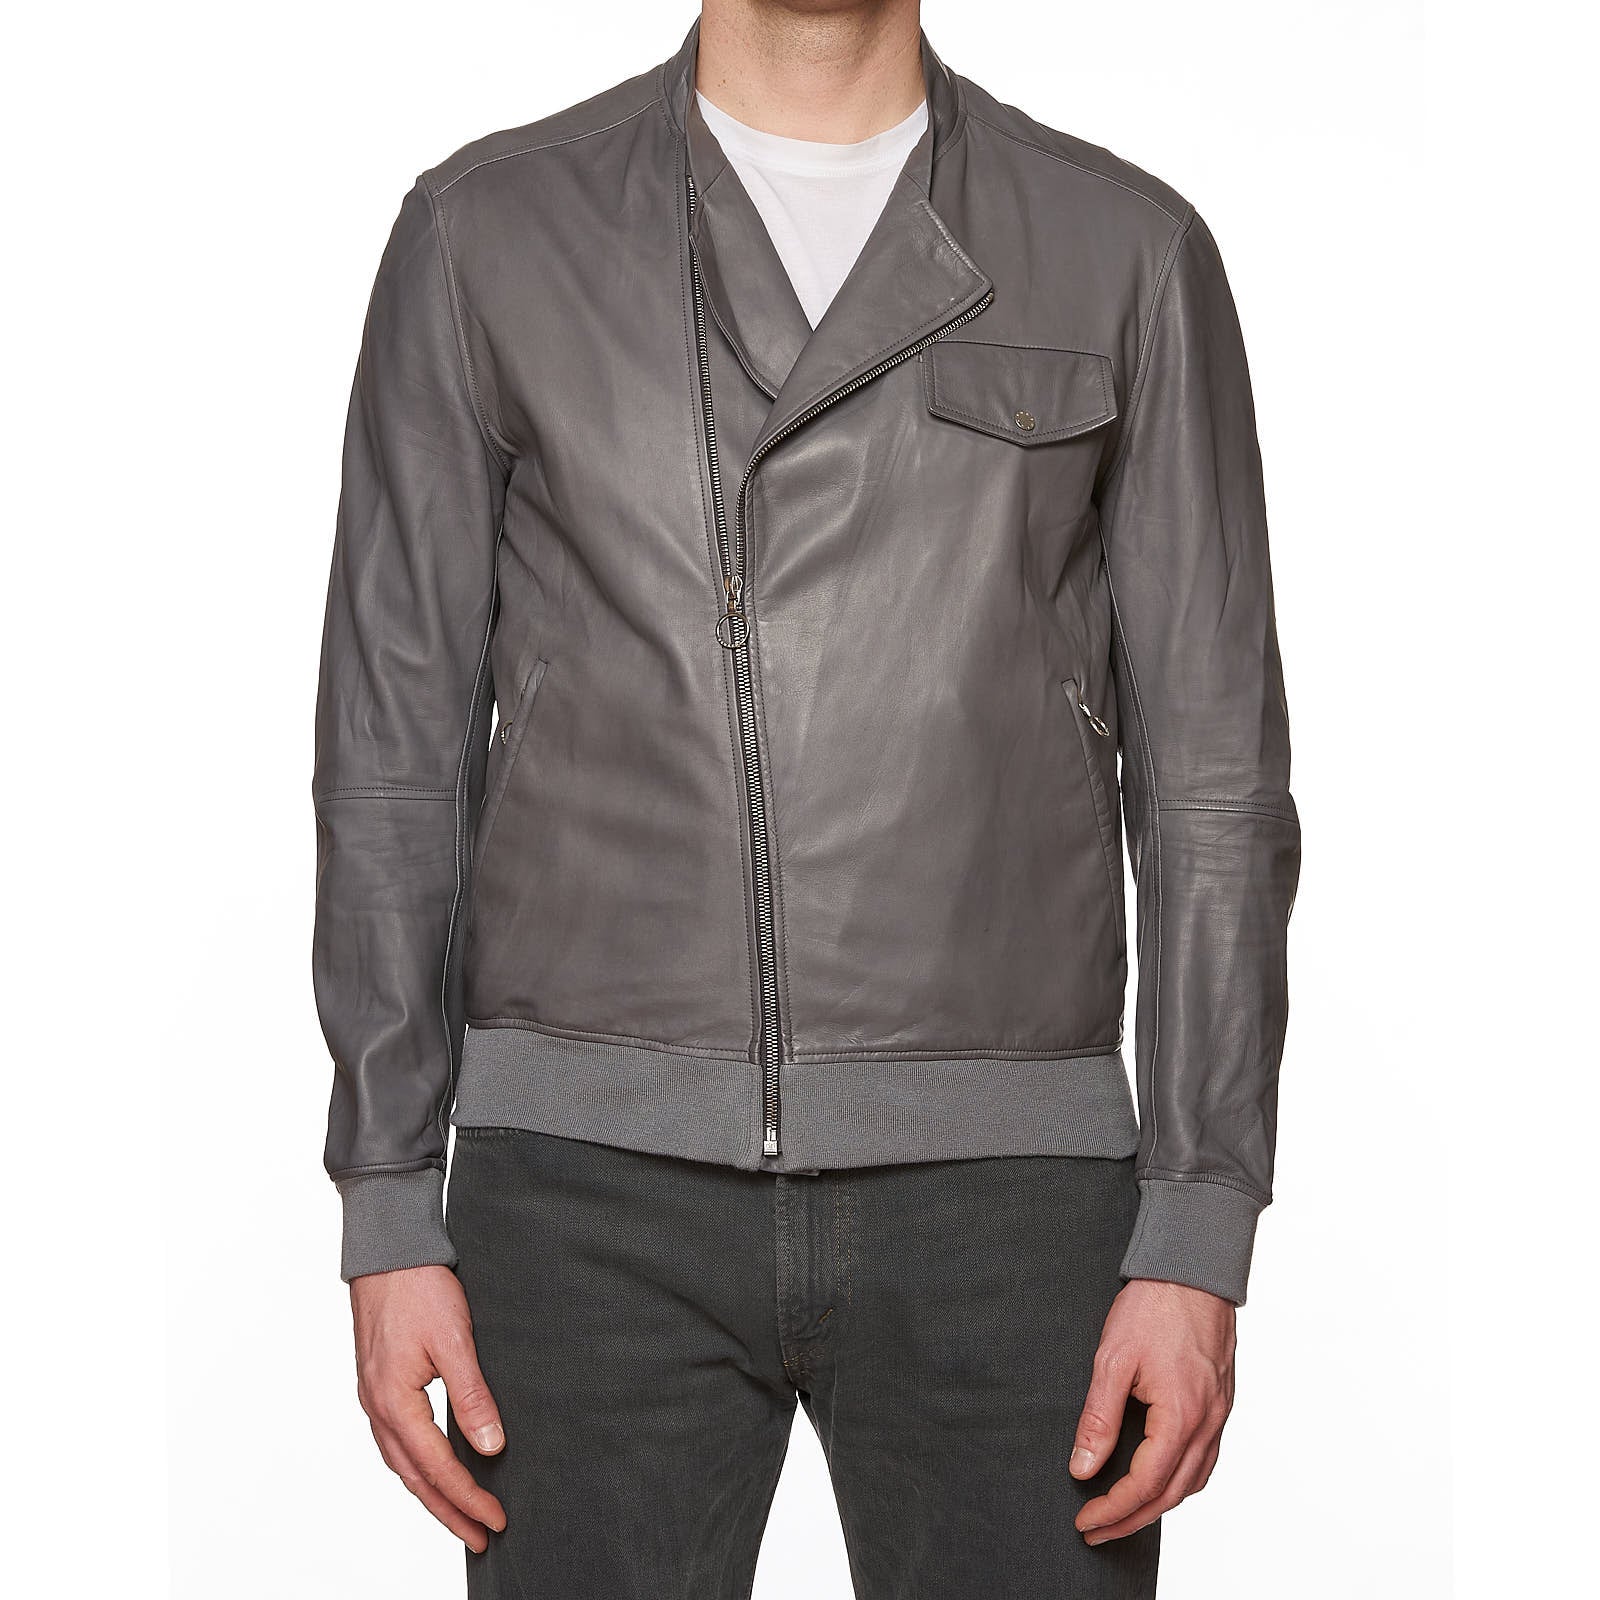 SERAPHIN Gray Lamb Leather Unlined Bomber Jacket FR 50 US M SERAPHIN